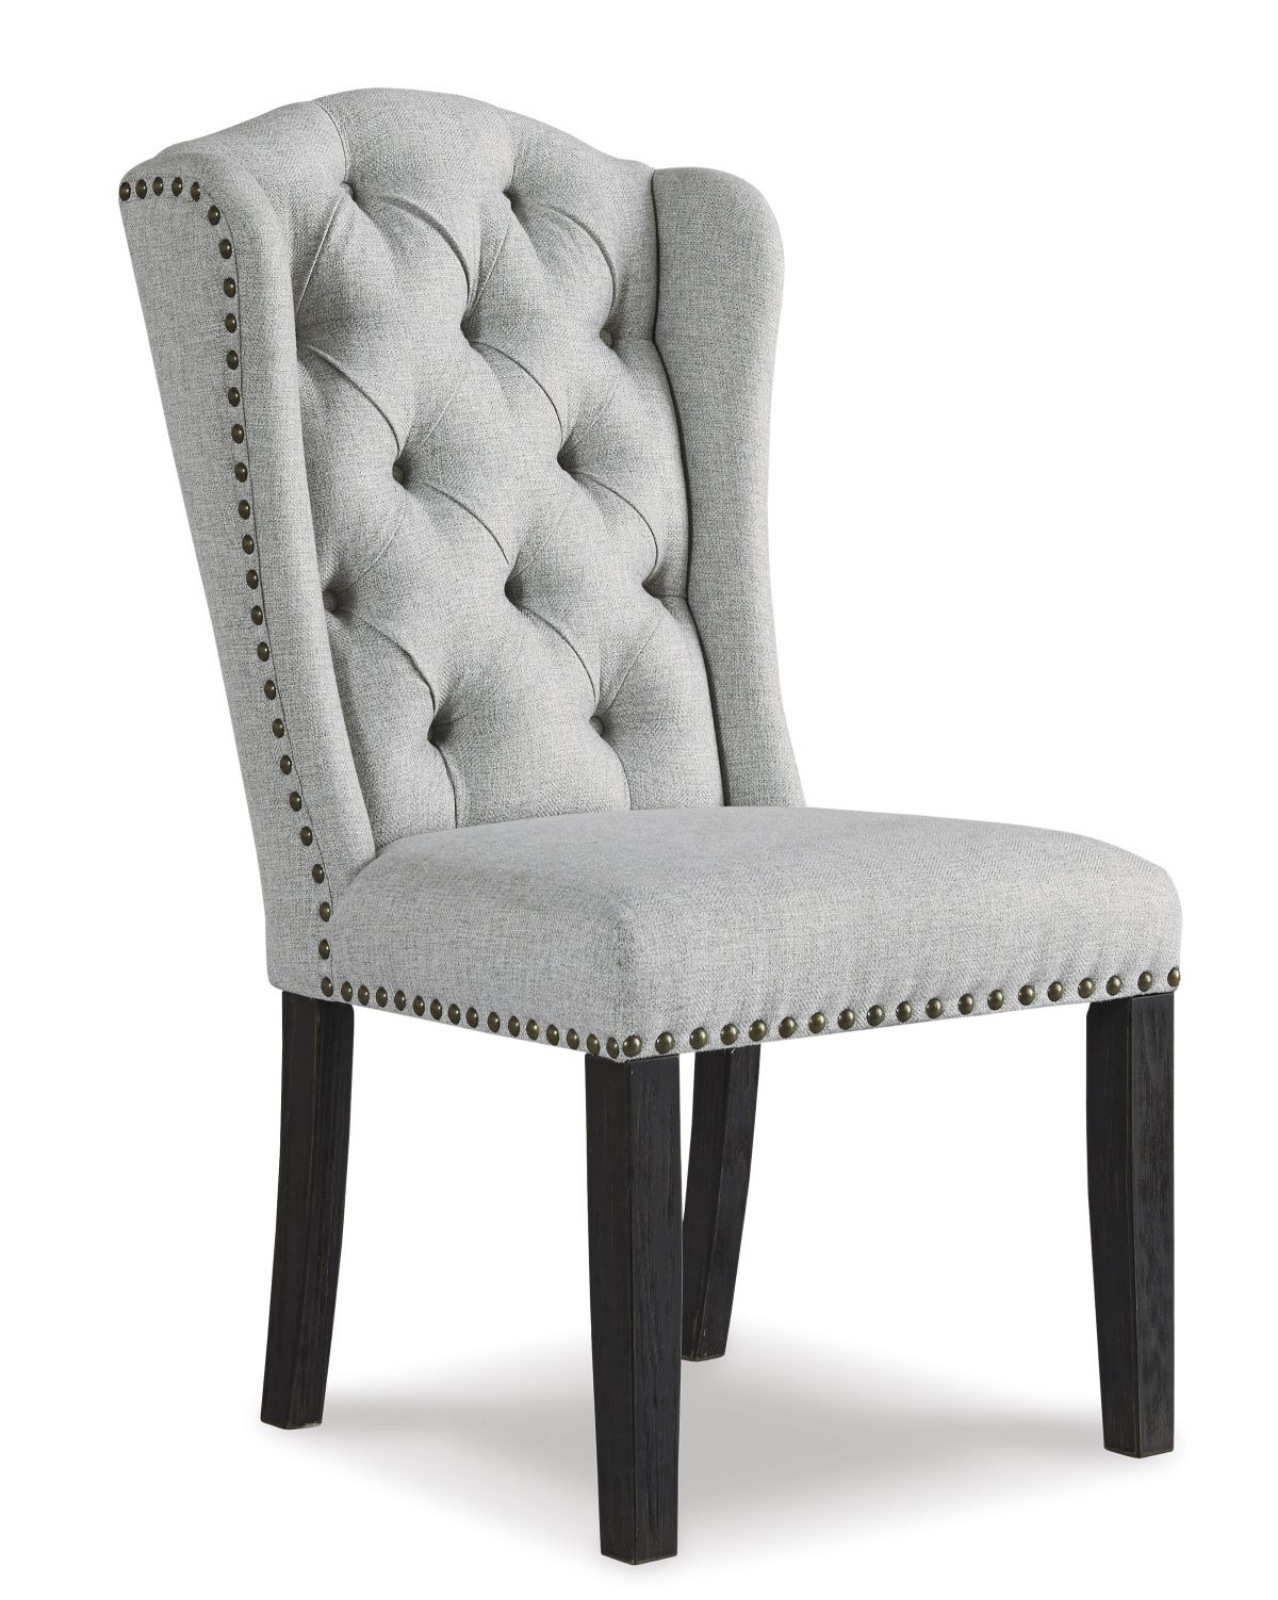 Picture of Jeanette Dining Chair